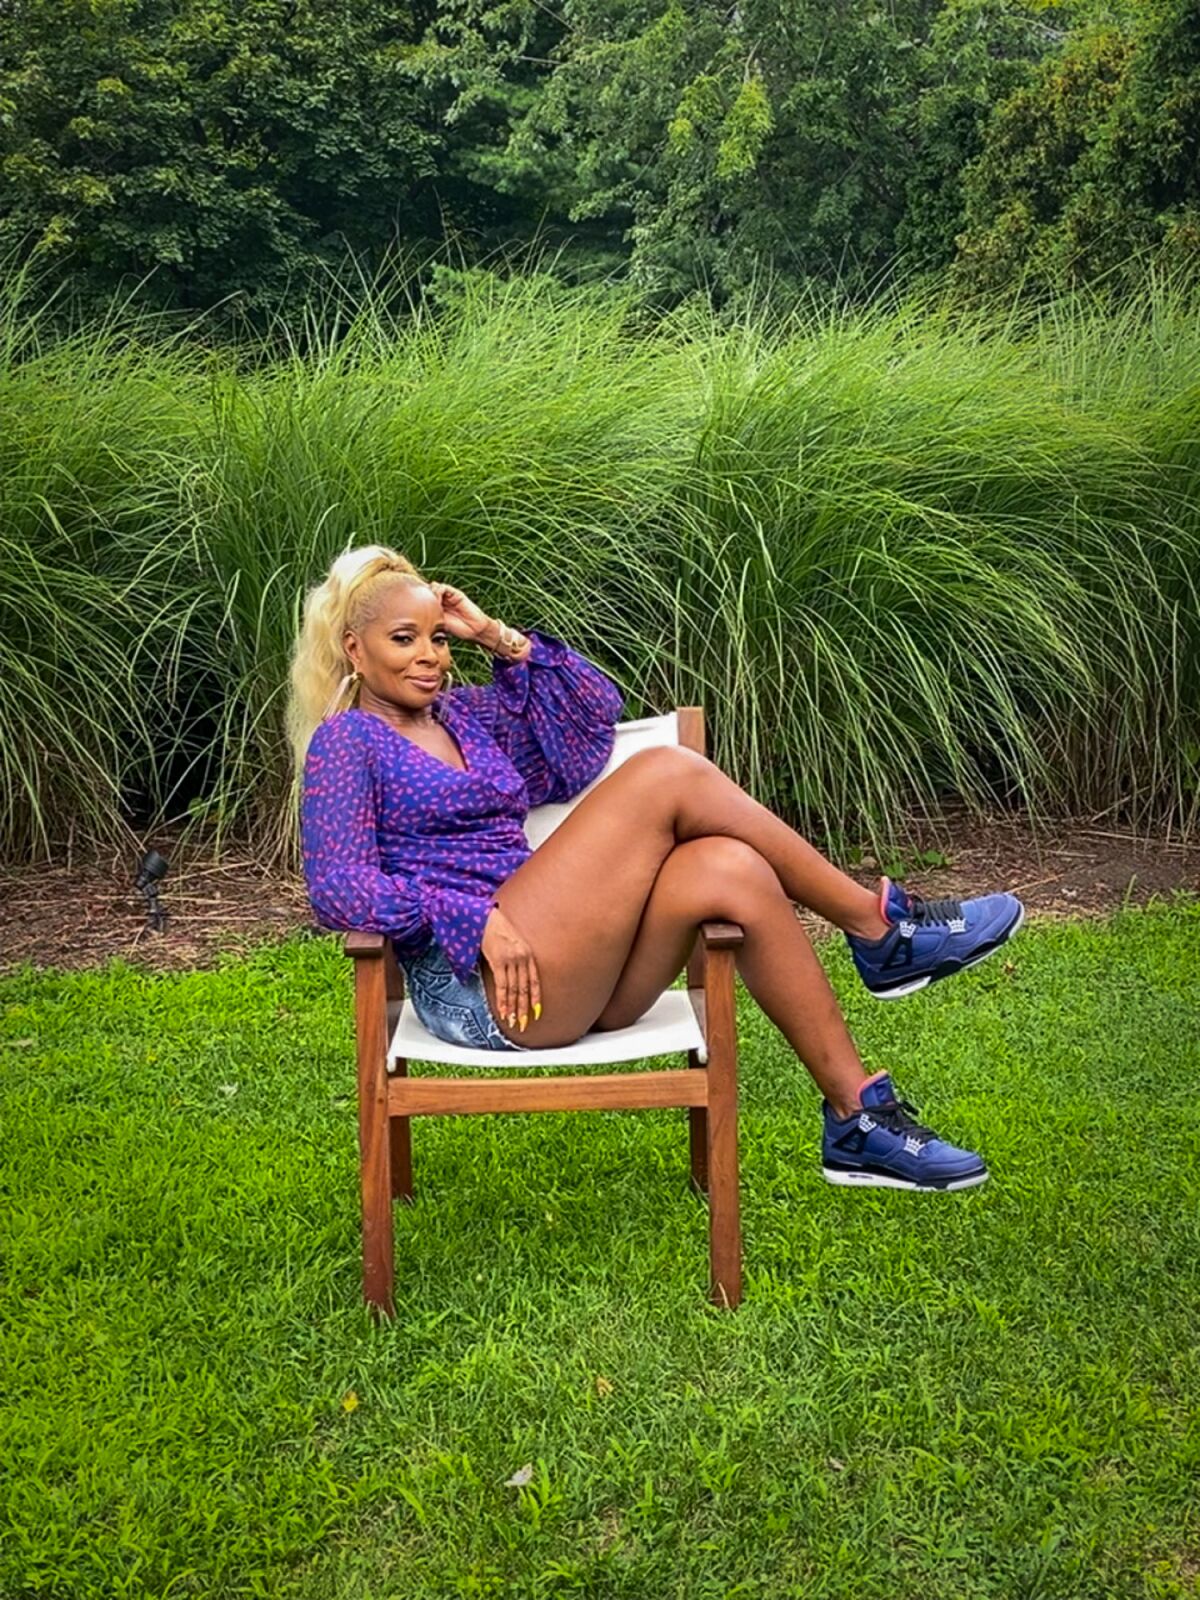 Actress and R&B recording artist Mary J. Blige in the backyard of her home. Blige stars in Starz’s “Power Book II: Ghost.”